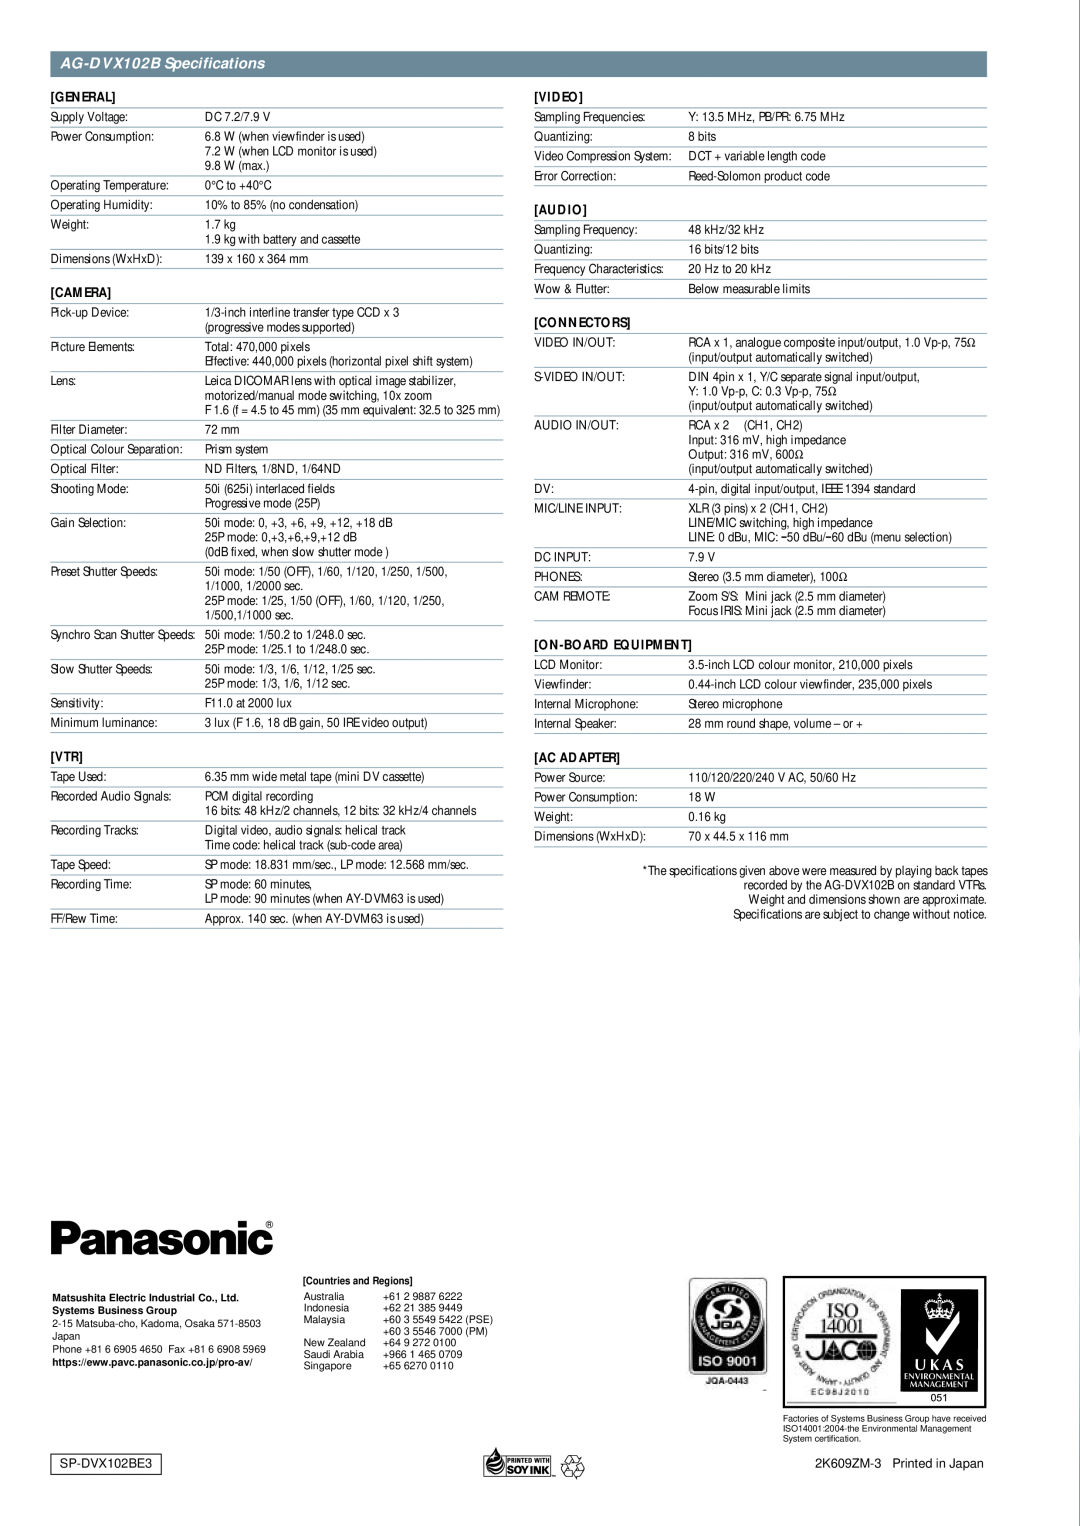 Panasonic manual AG-DVX102B Specifications, General, Camera, Video, Audio, Connectors, On-Board Equipment, Ac Adapter 